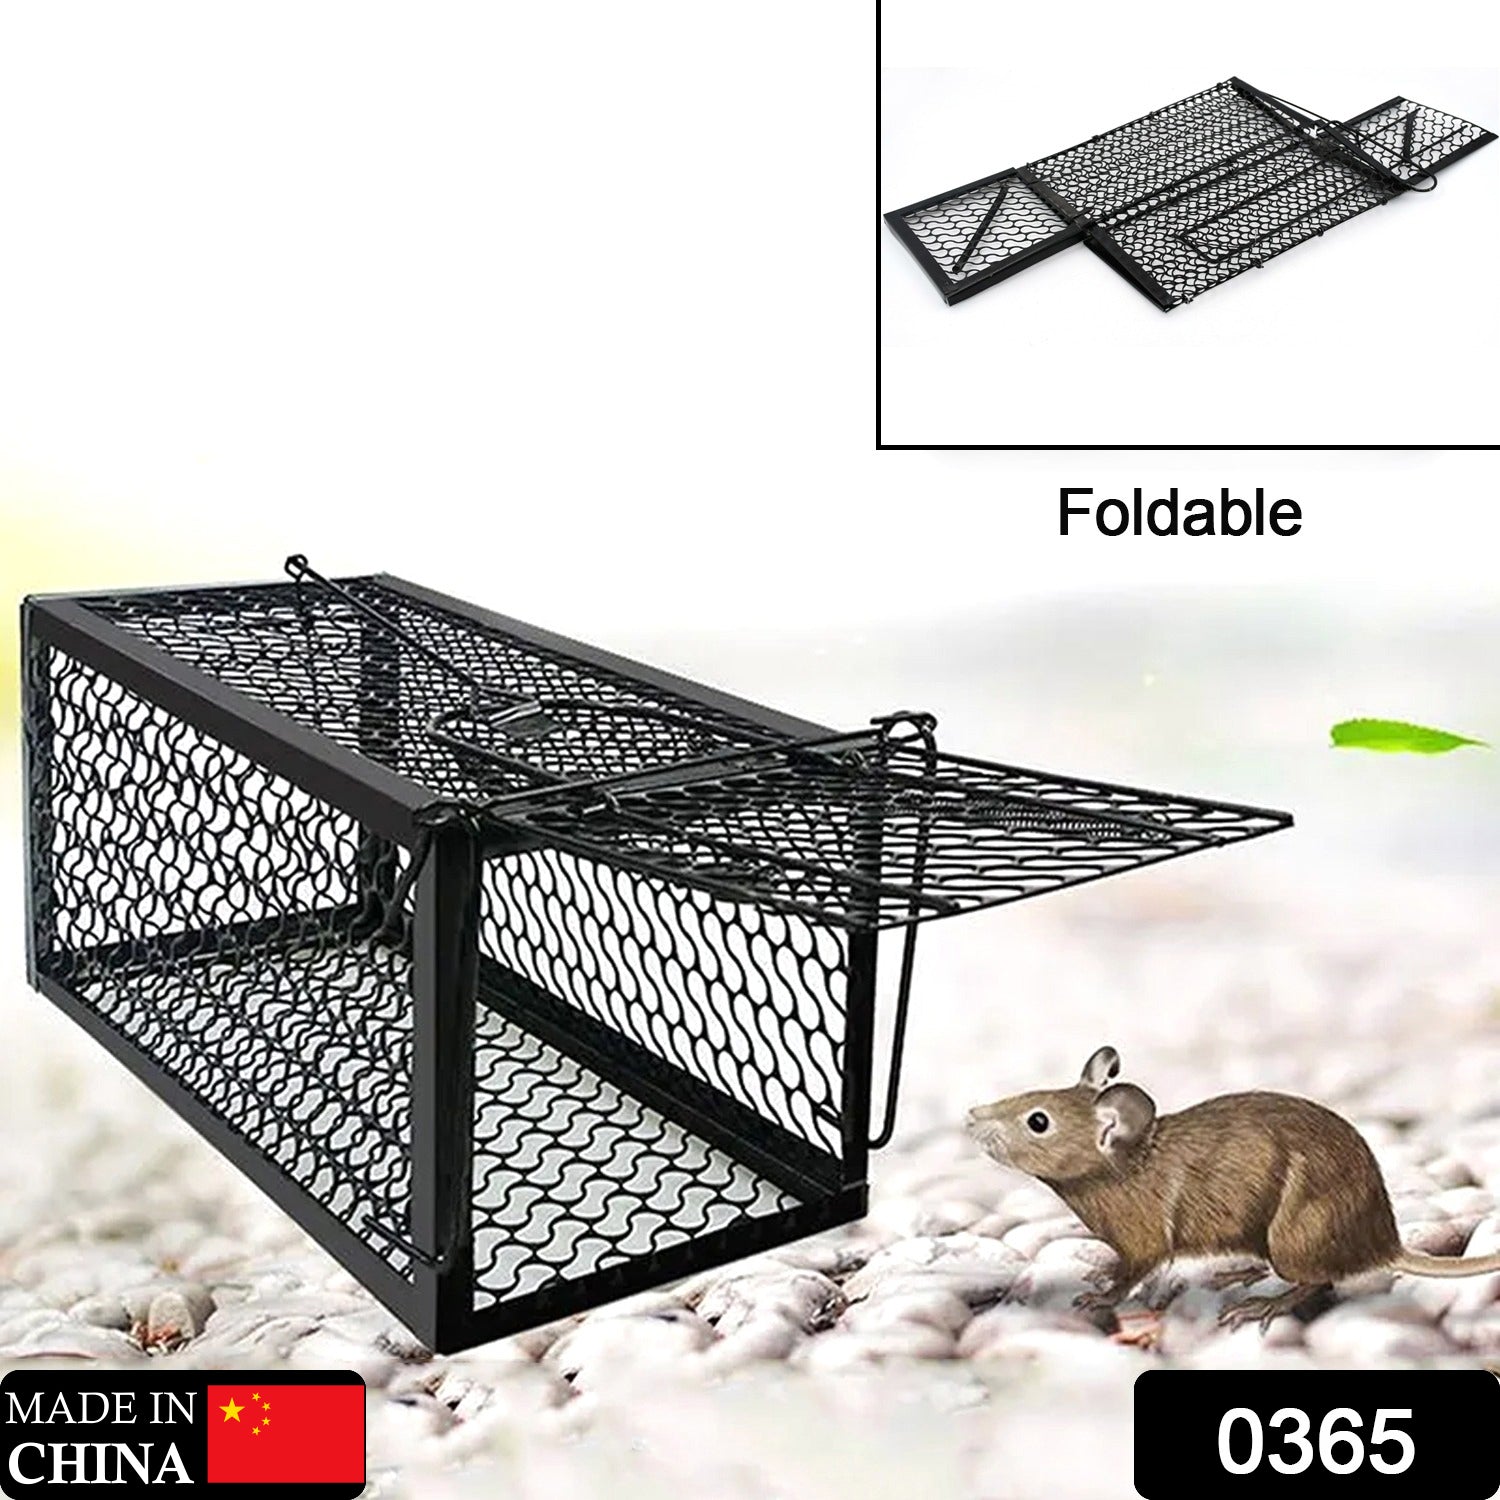 Foldable Mouse Trap Squirrel Trap Small Live Animal Trap Mouse Voles Hamsters Live Cage Rat Mouse Cage Trap for Mice Easy to Catch and Release